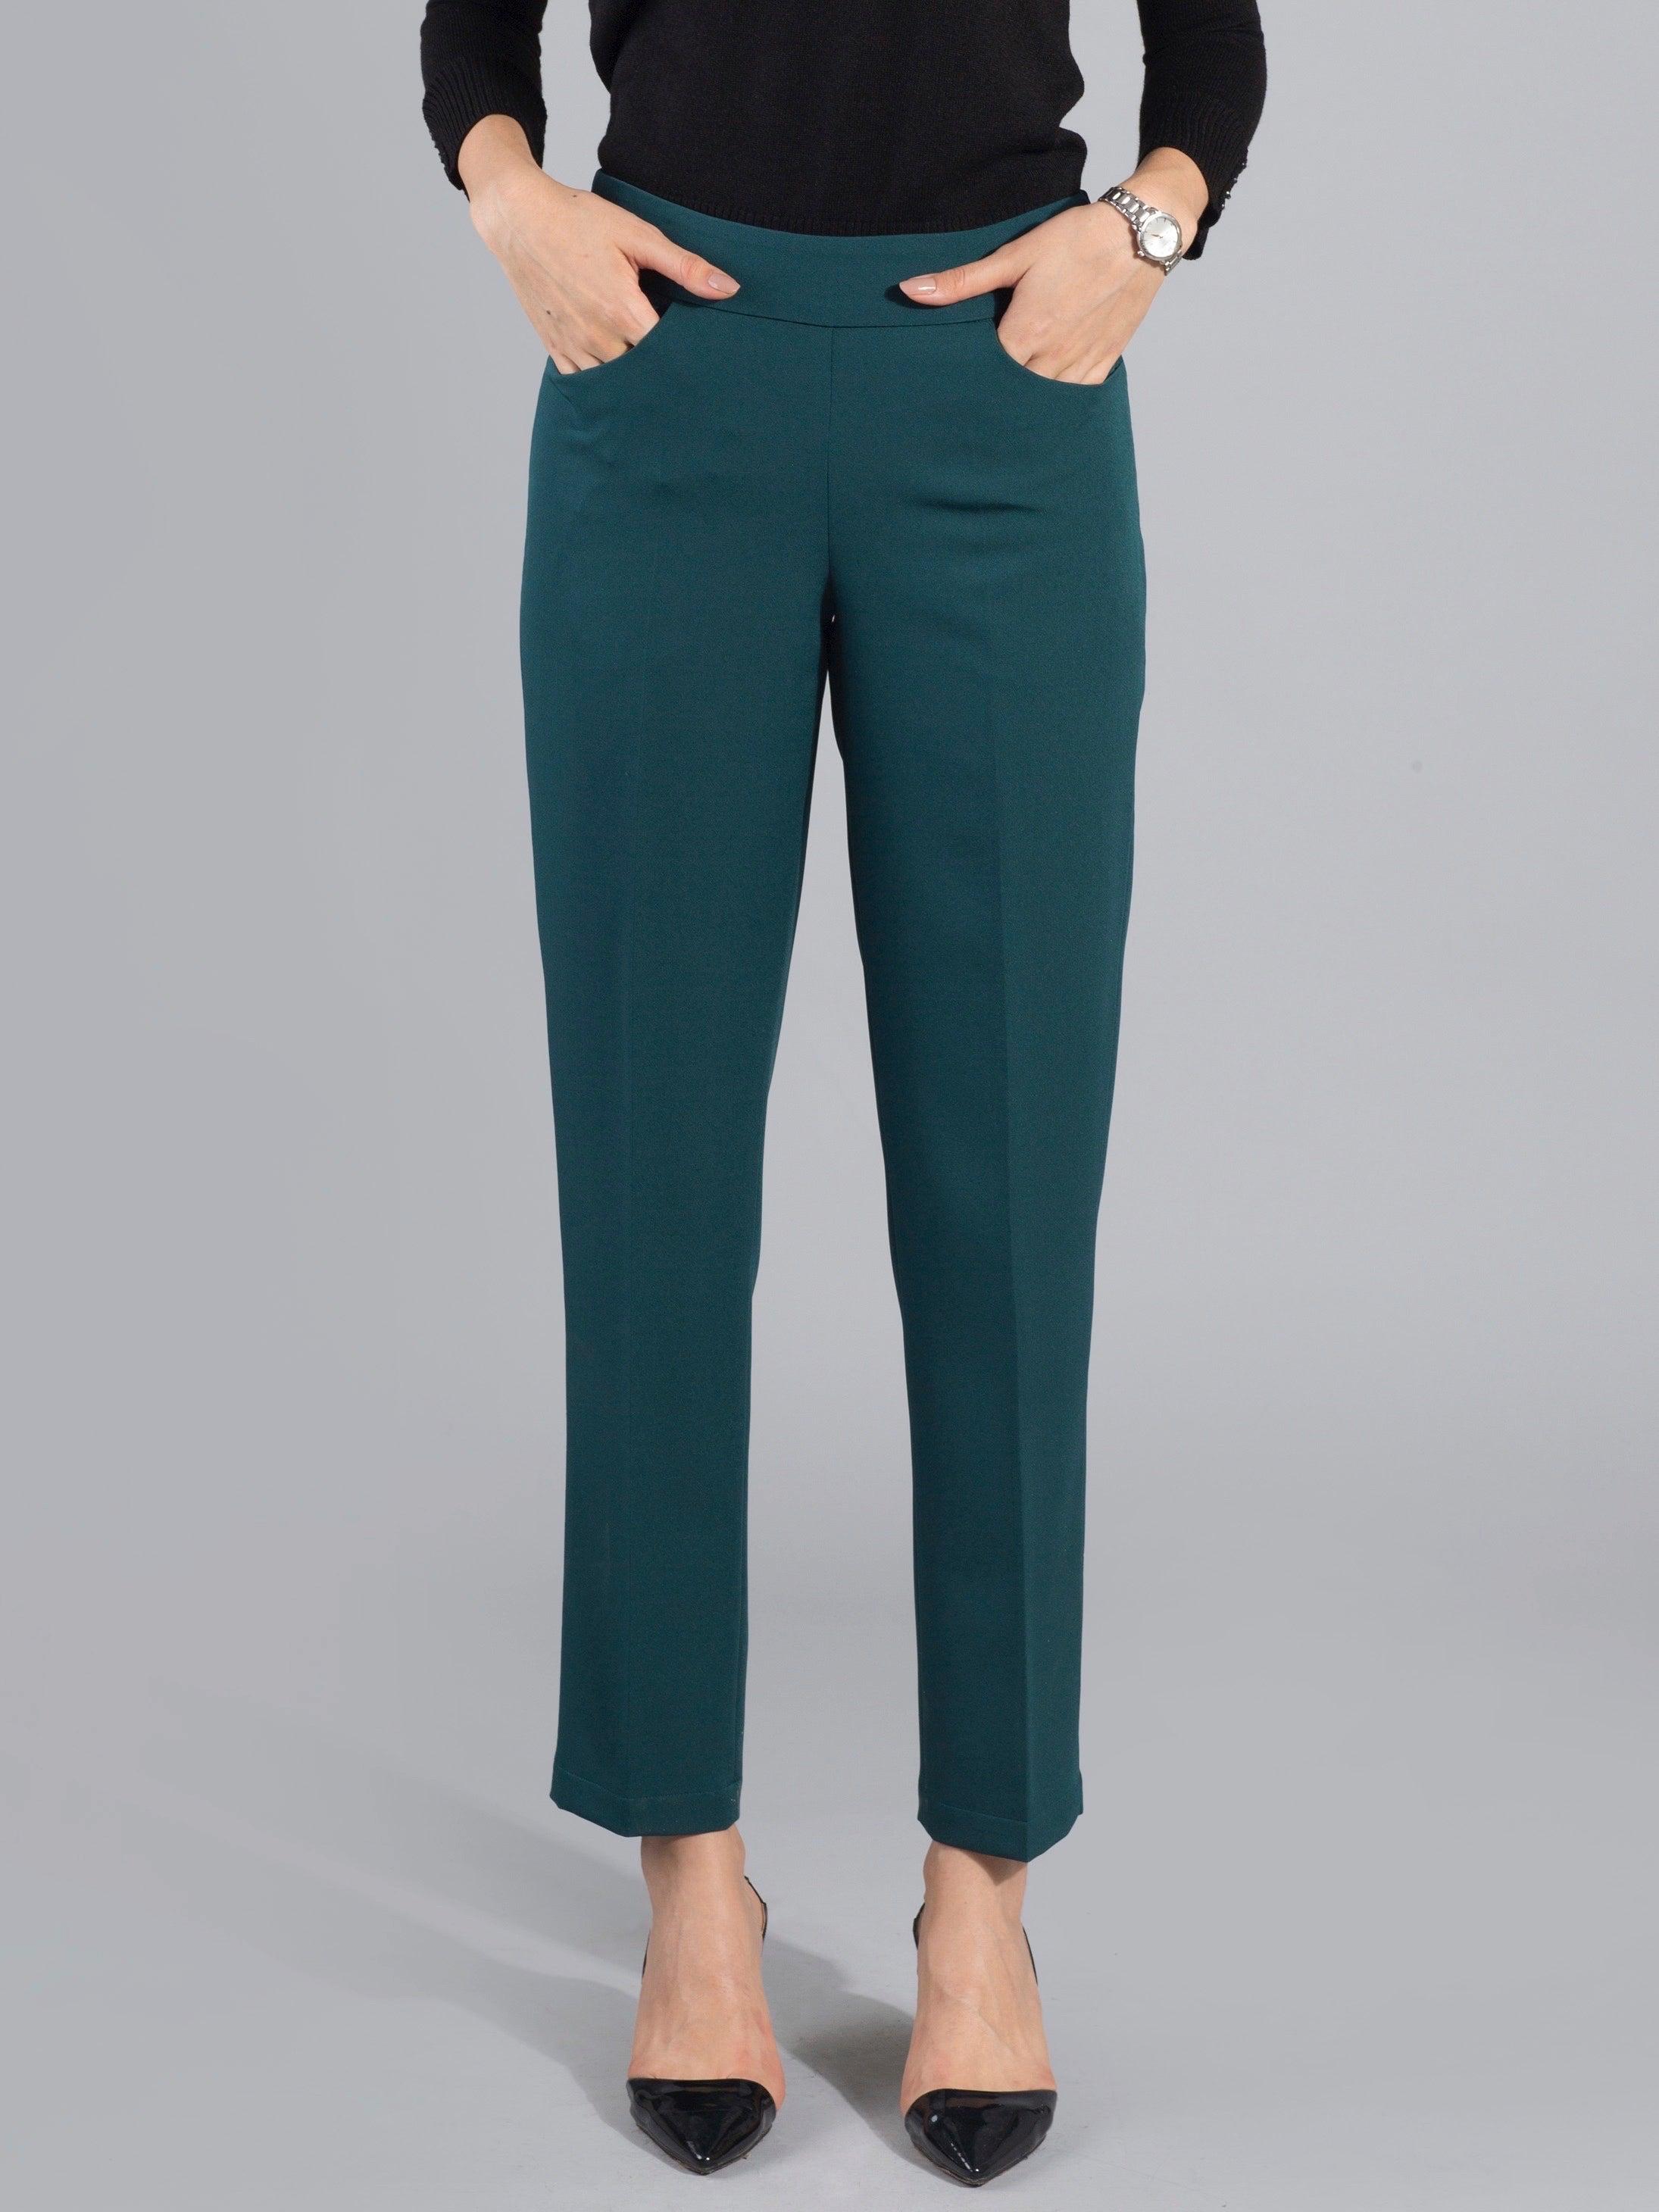 Essential Easy Care Work Trousers - Bottle Green| Formal Trousers